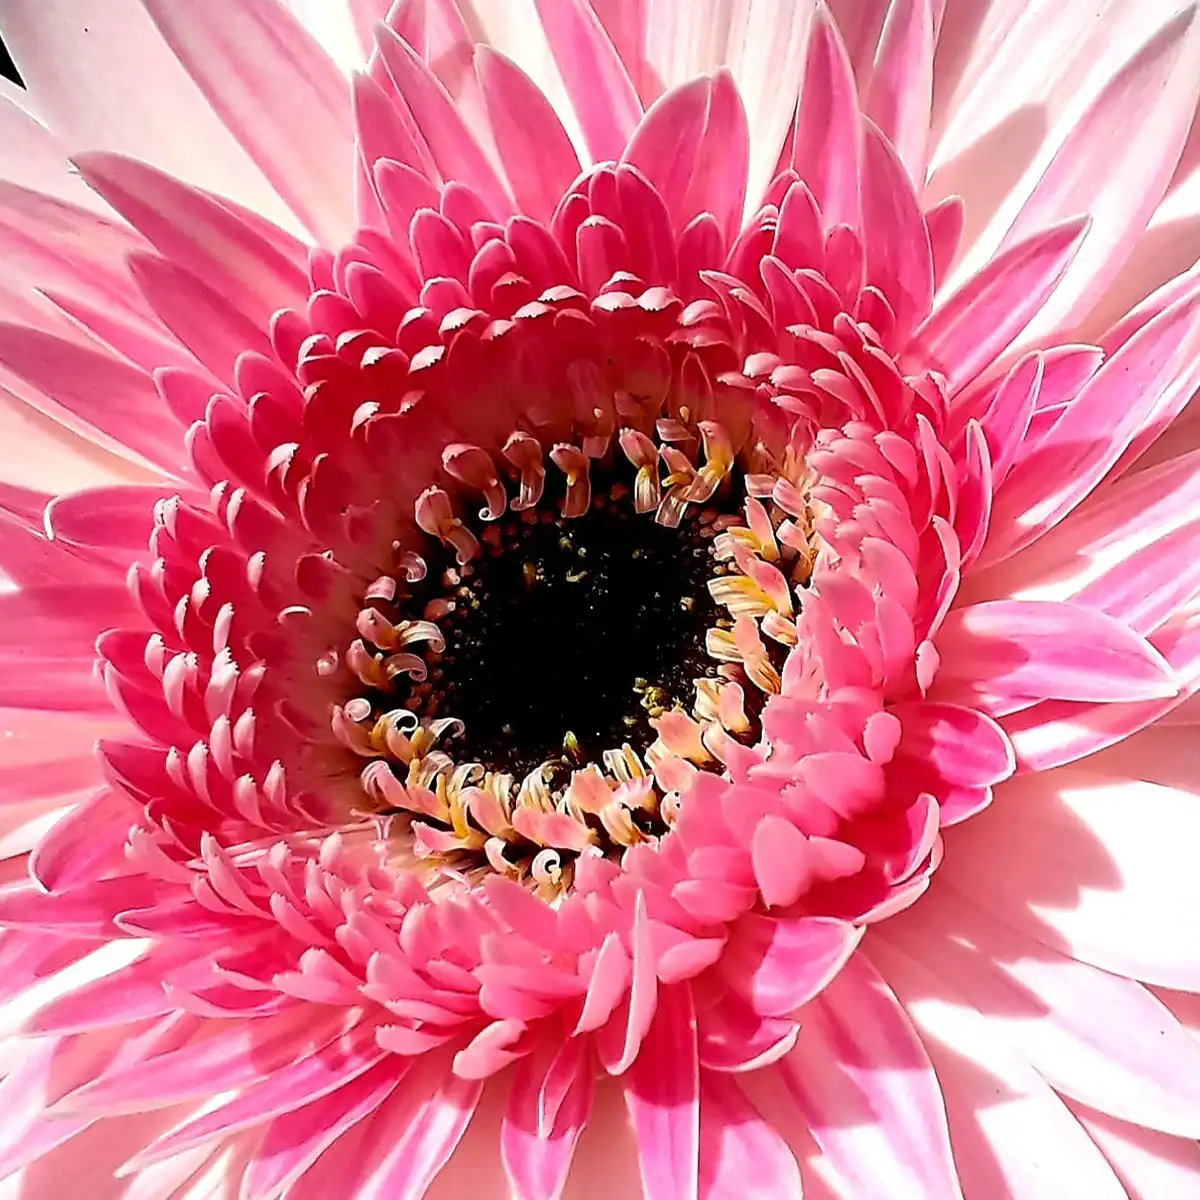 these-were-the-most-amazing-gerbera-varieties-exhibited-at-iftf-featured